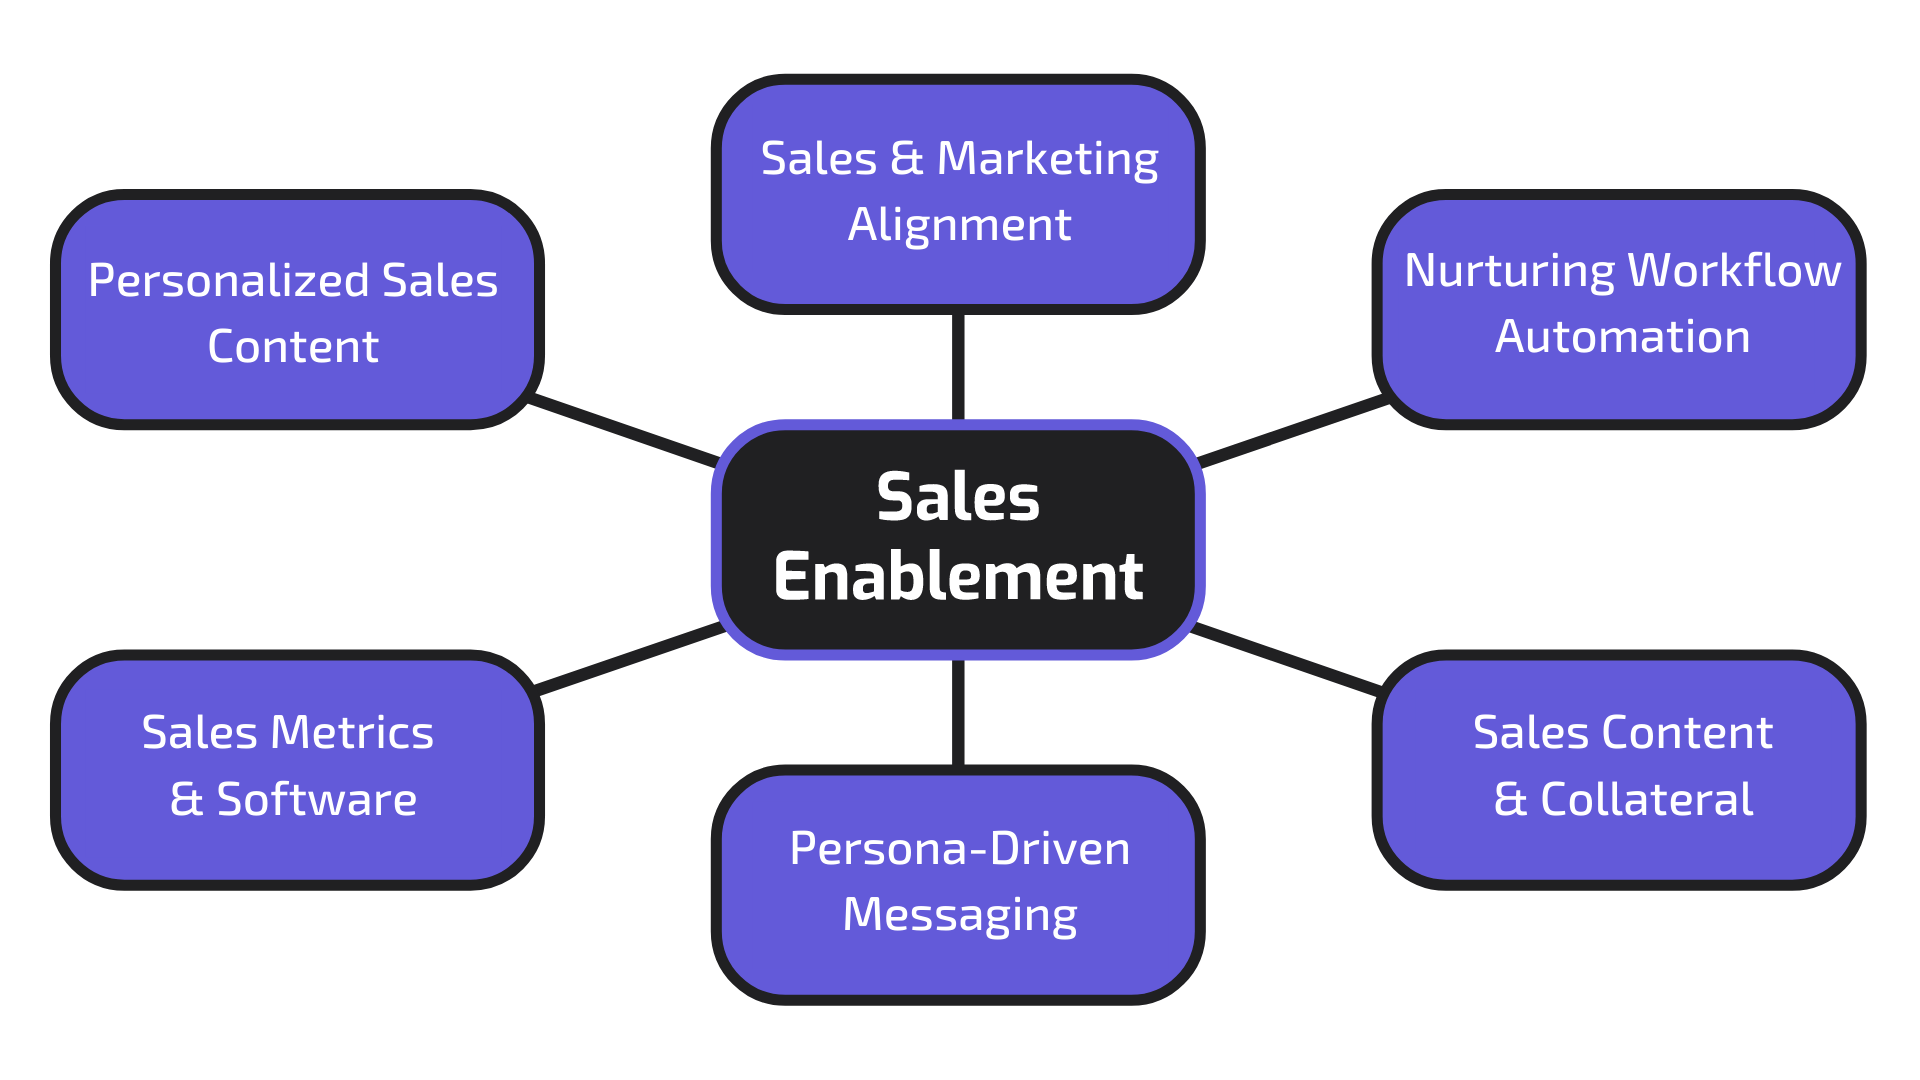 Sales Enablement: Connecting Personalized Sales Content, Sales Metric & Software, Persona-Driven Messaging, Sales & Marketing Alignment, Nurturing & Workflow Automation, Sales Content & Collateral